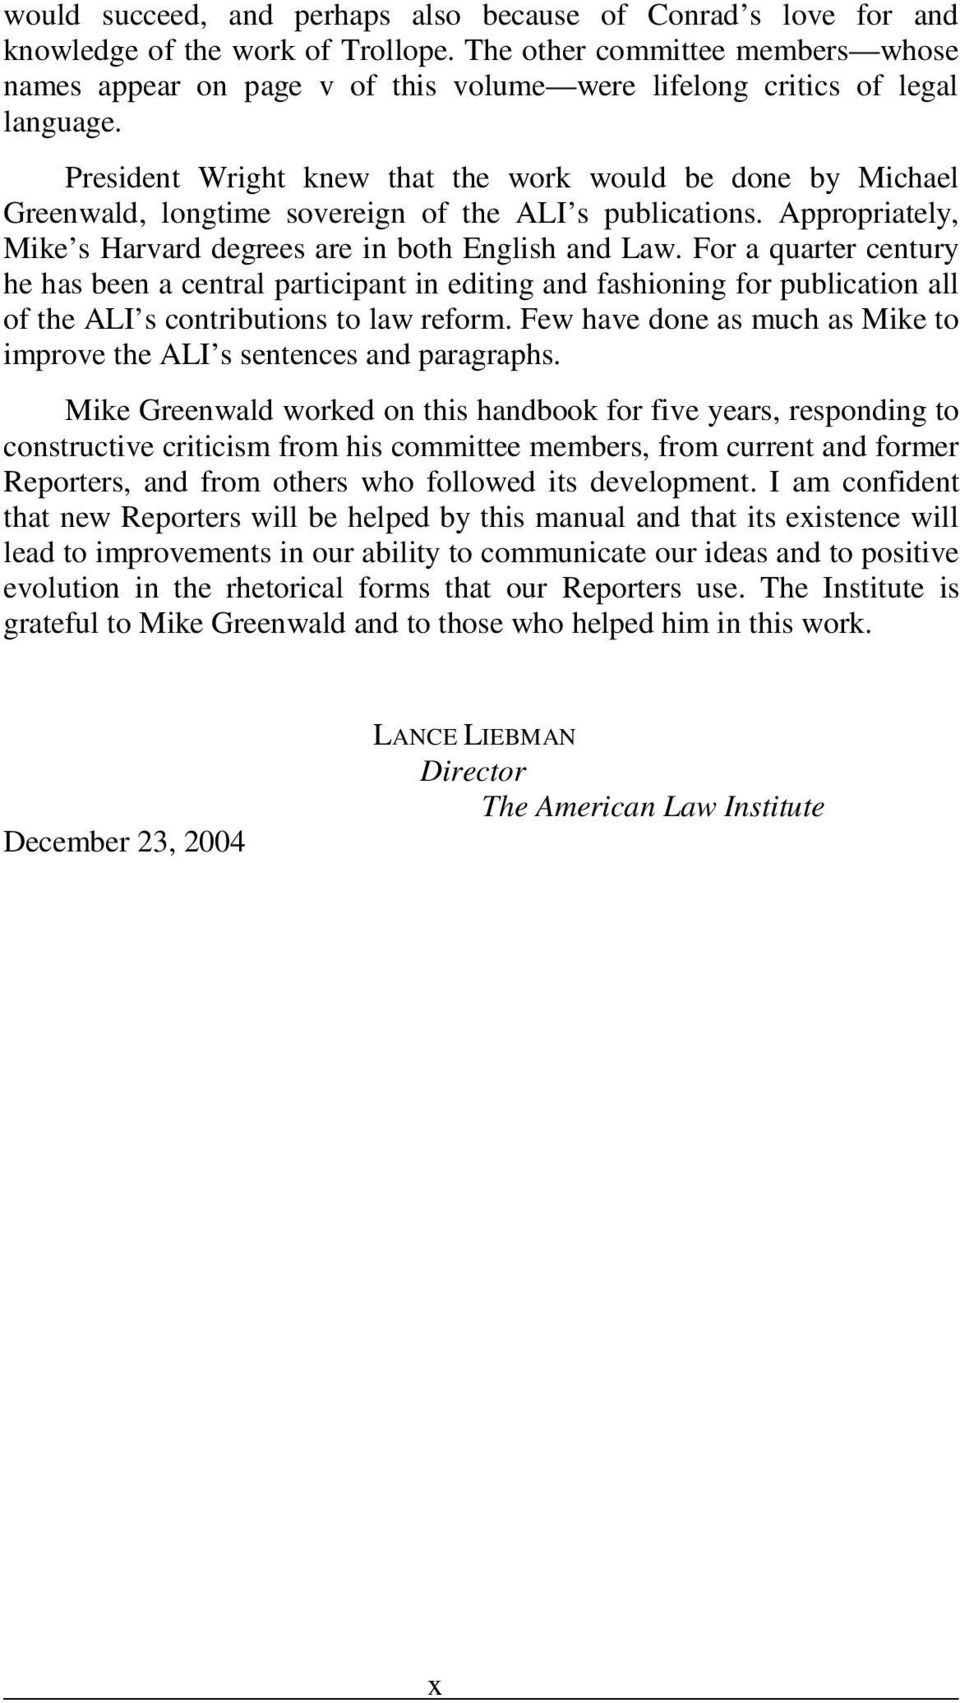 President Wright knew that the work would be done by Michael Greenwald, longtime sovereign of the ALI s publications. Appropriately, Mike s Harvard degrees are in both English and Law.